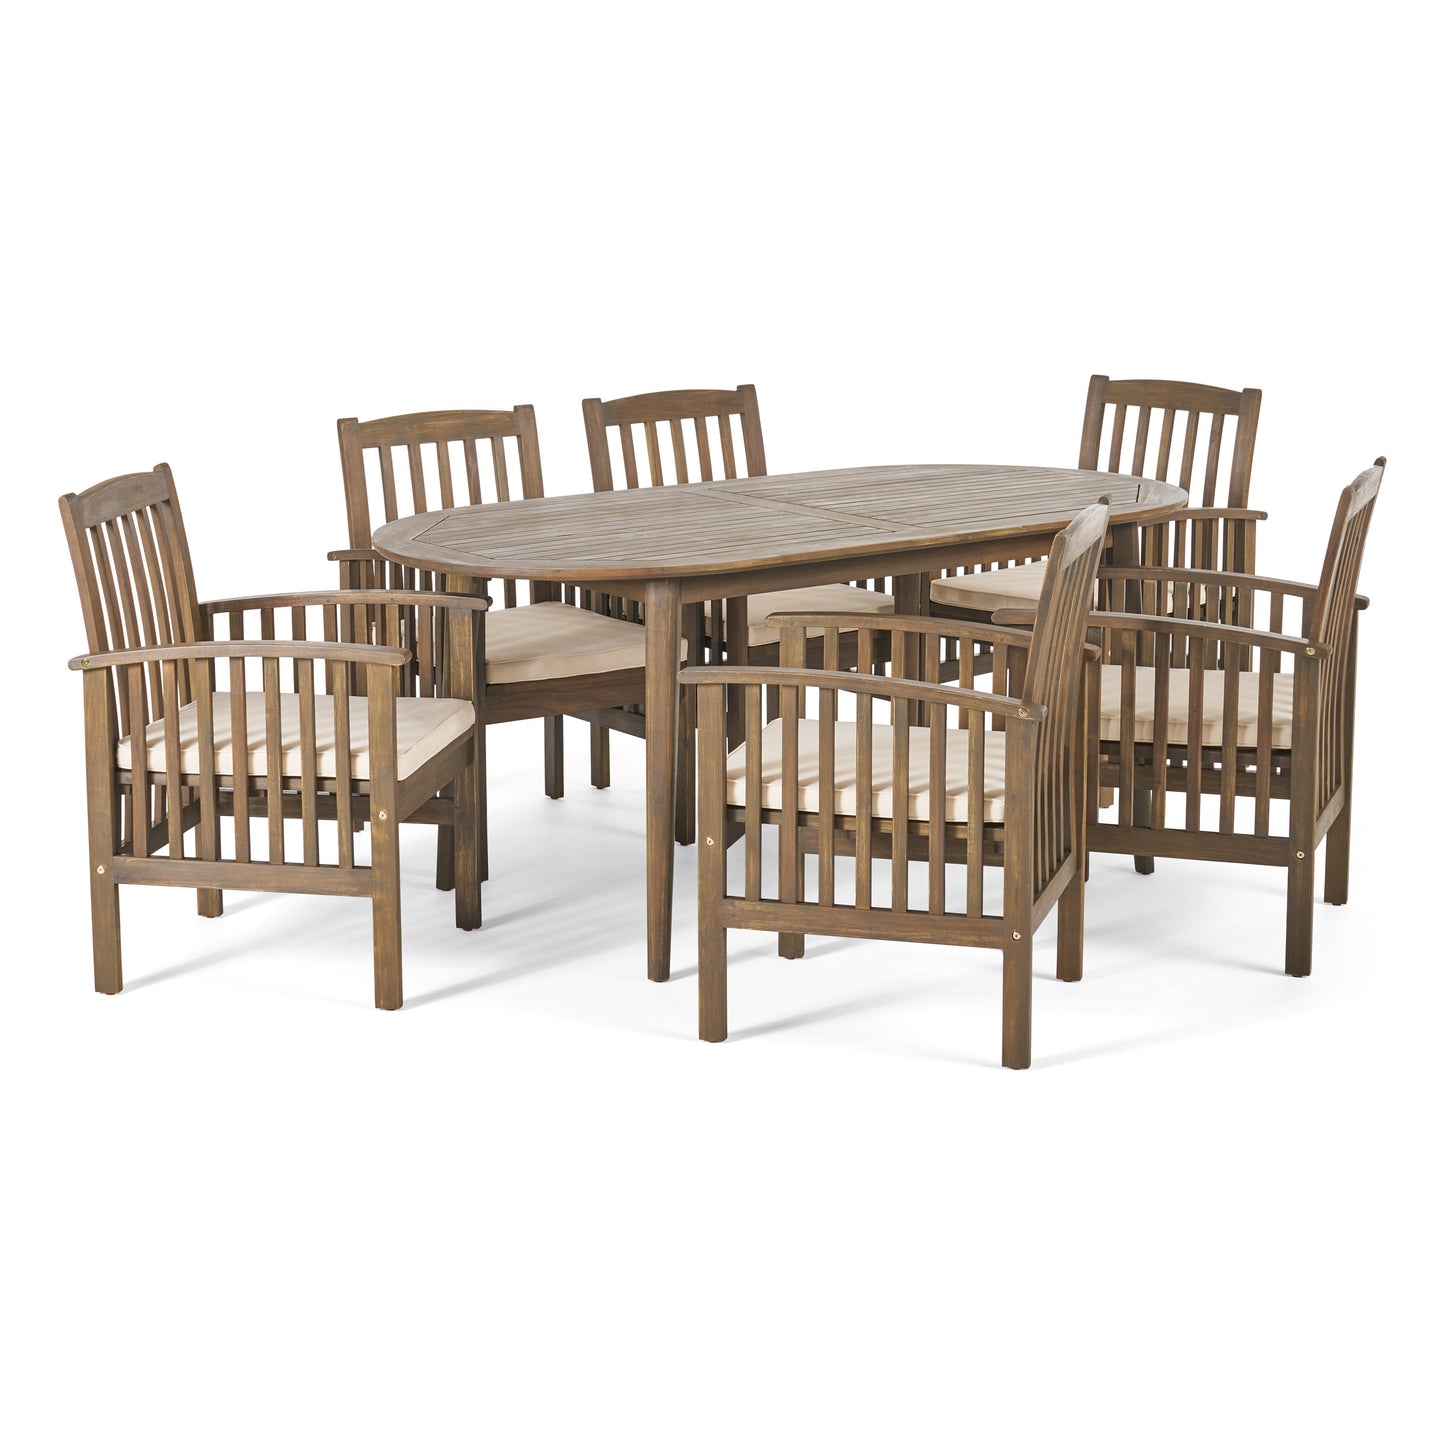 Spring Acacia Patio Dining Set, 6-Seater, 71" Oval Table with Straight Legs